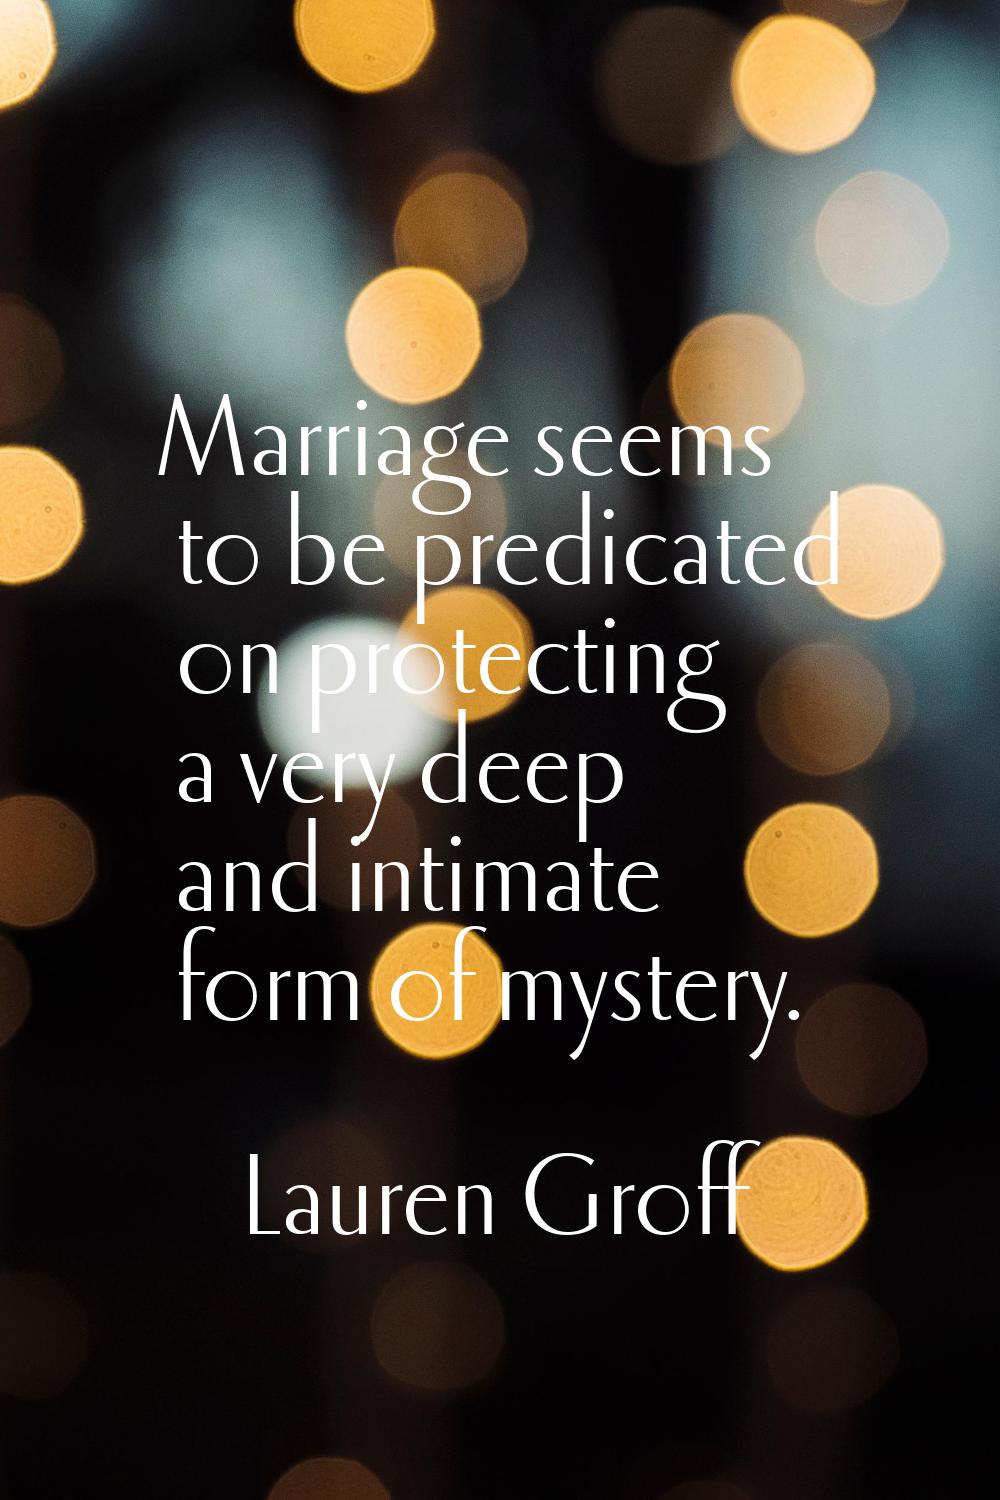 Marriage seems to be predicated on protecting a very deep and intimate form of mystery.